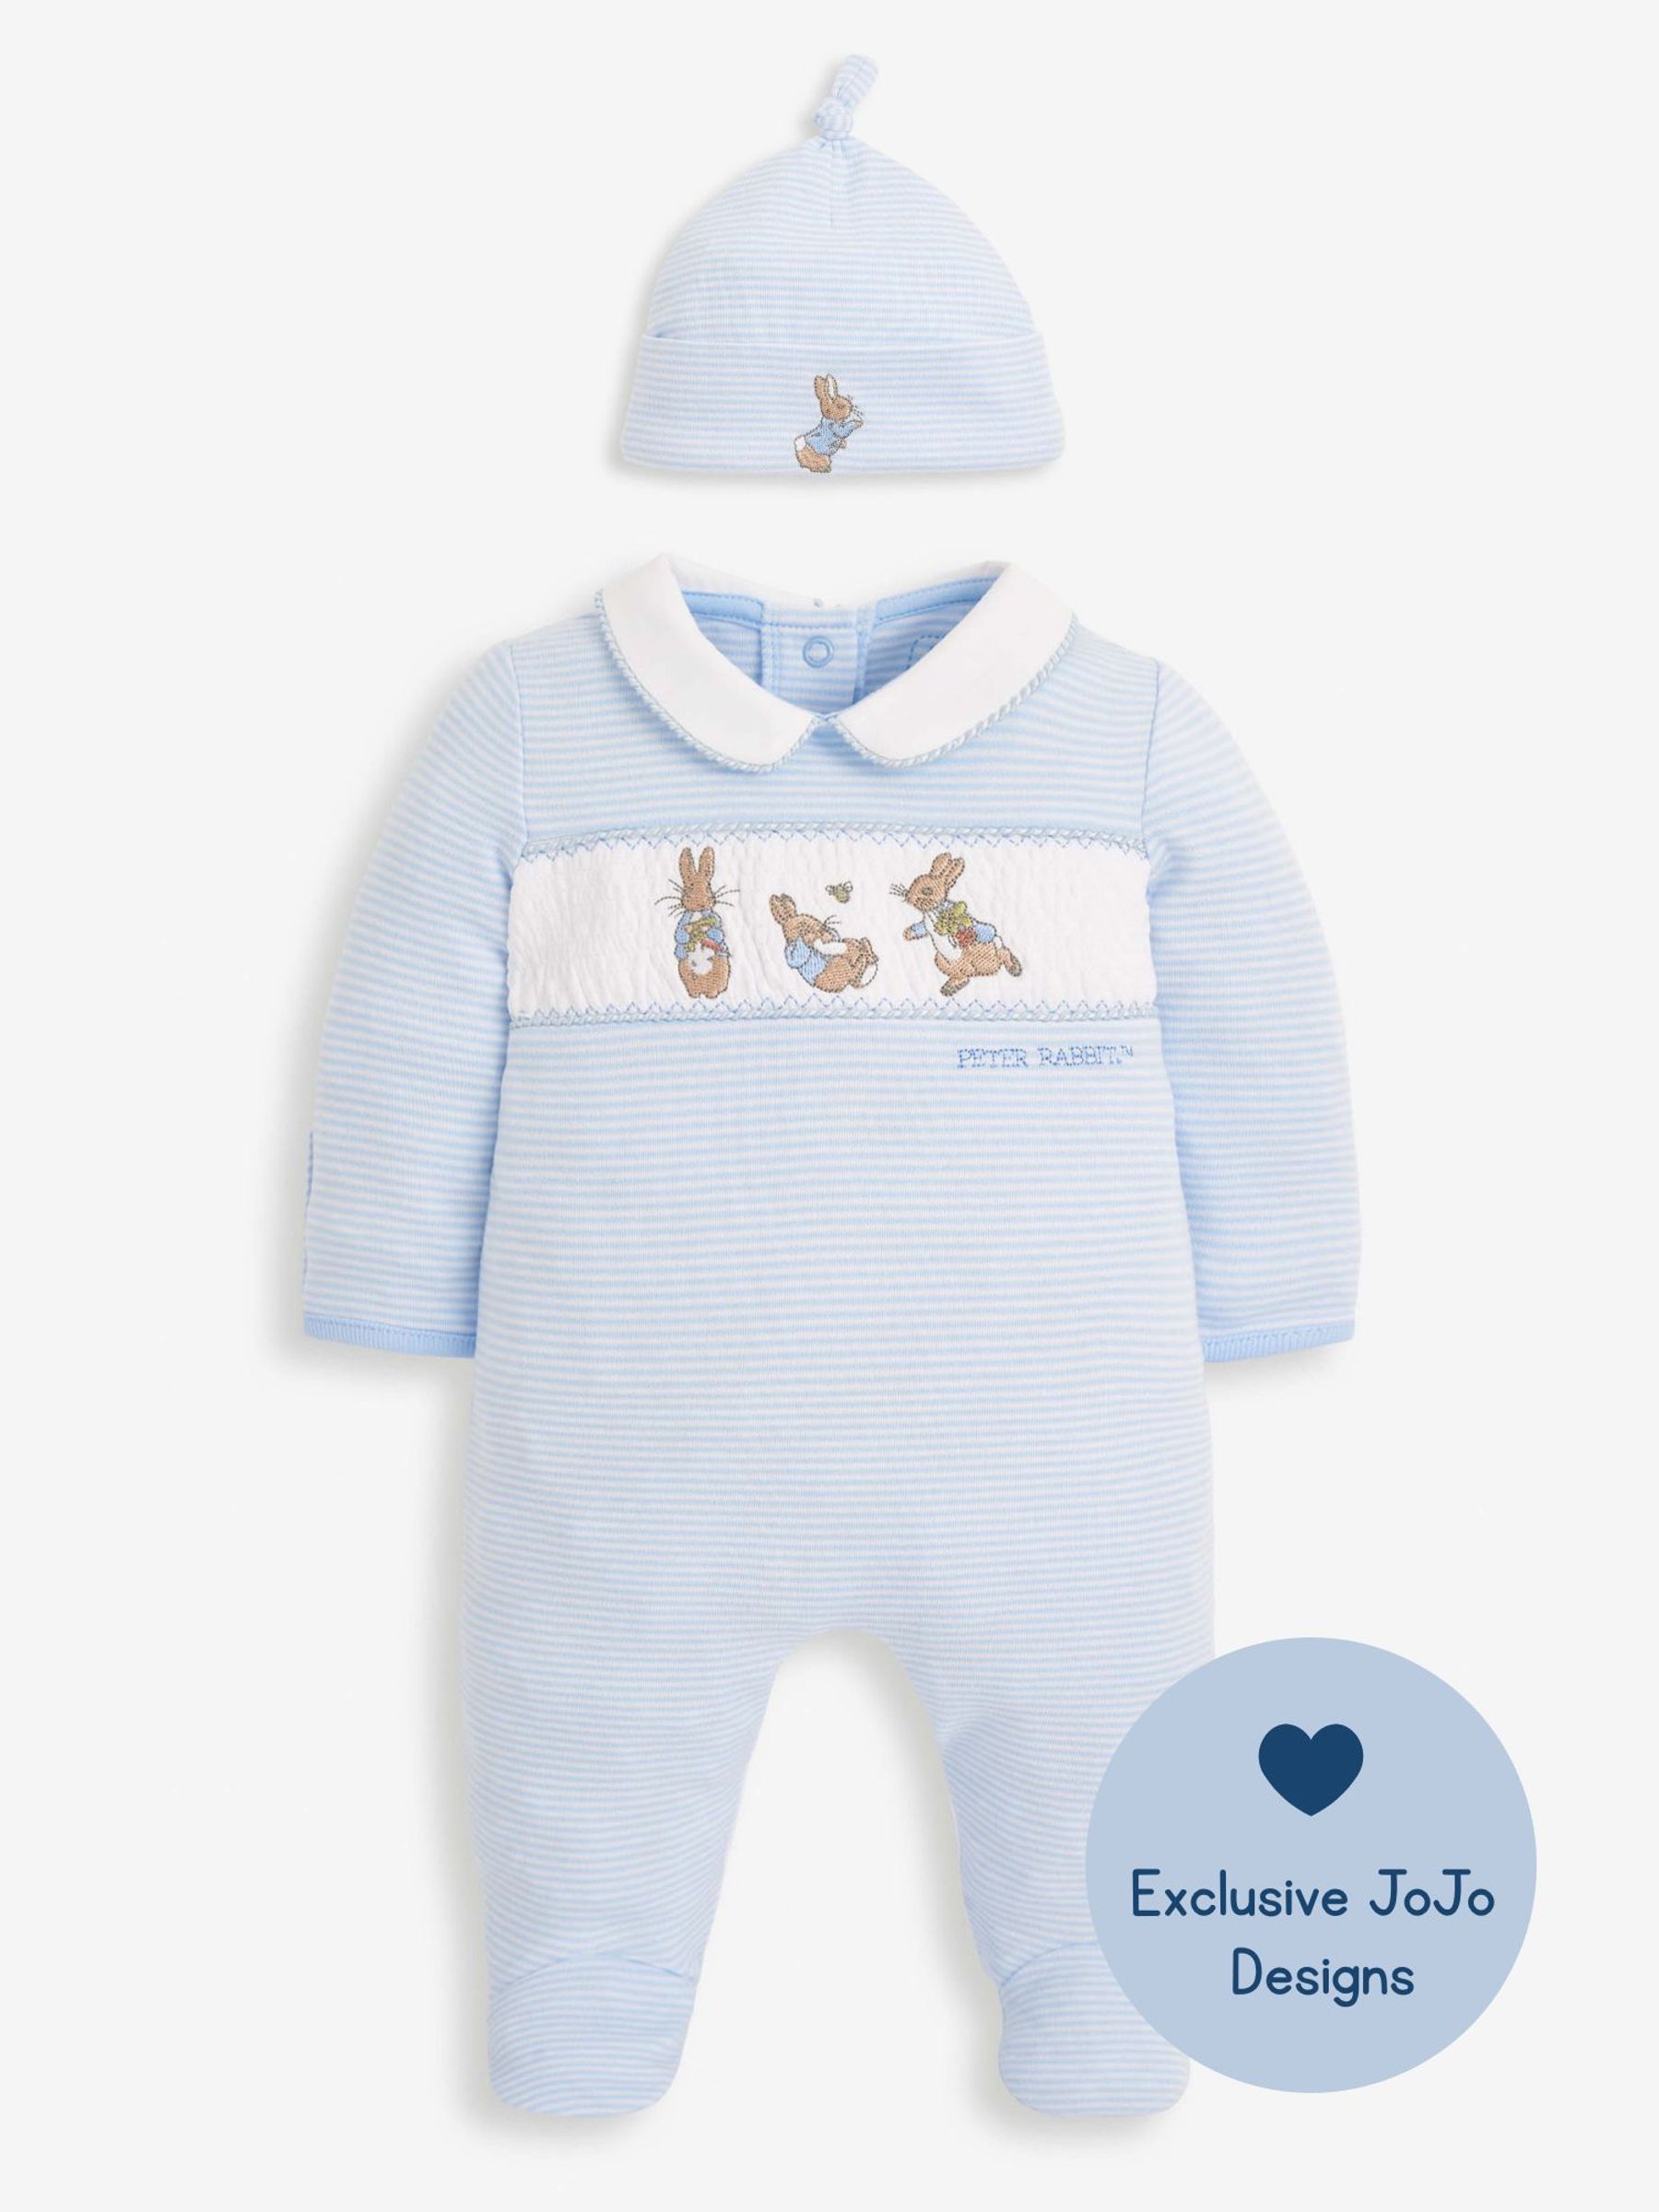 Buy Blue 2-Piece Peter Rabbit Smocked Baby Sleepsuit & Hat Set from the ...